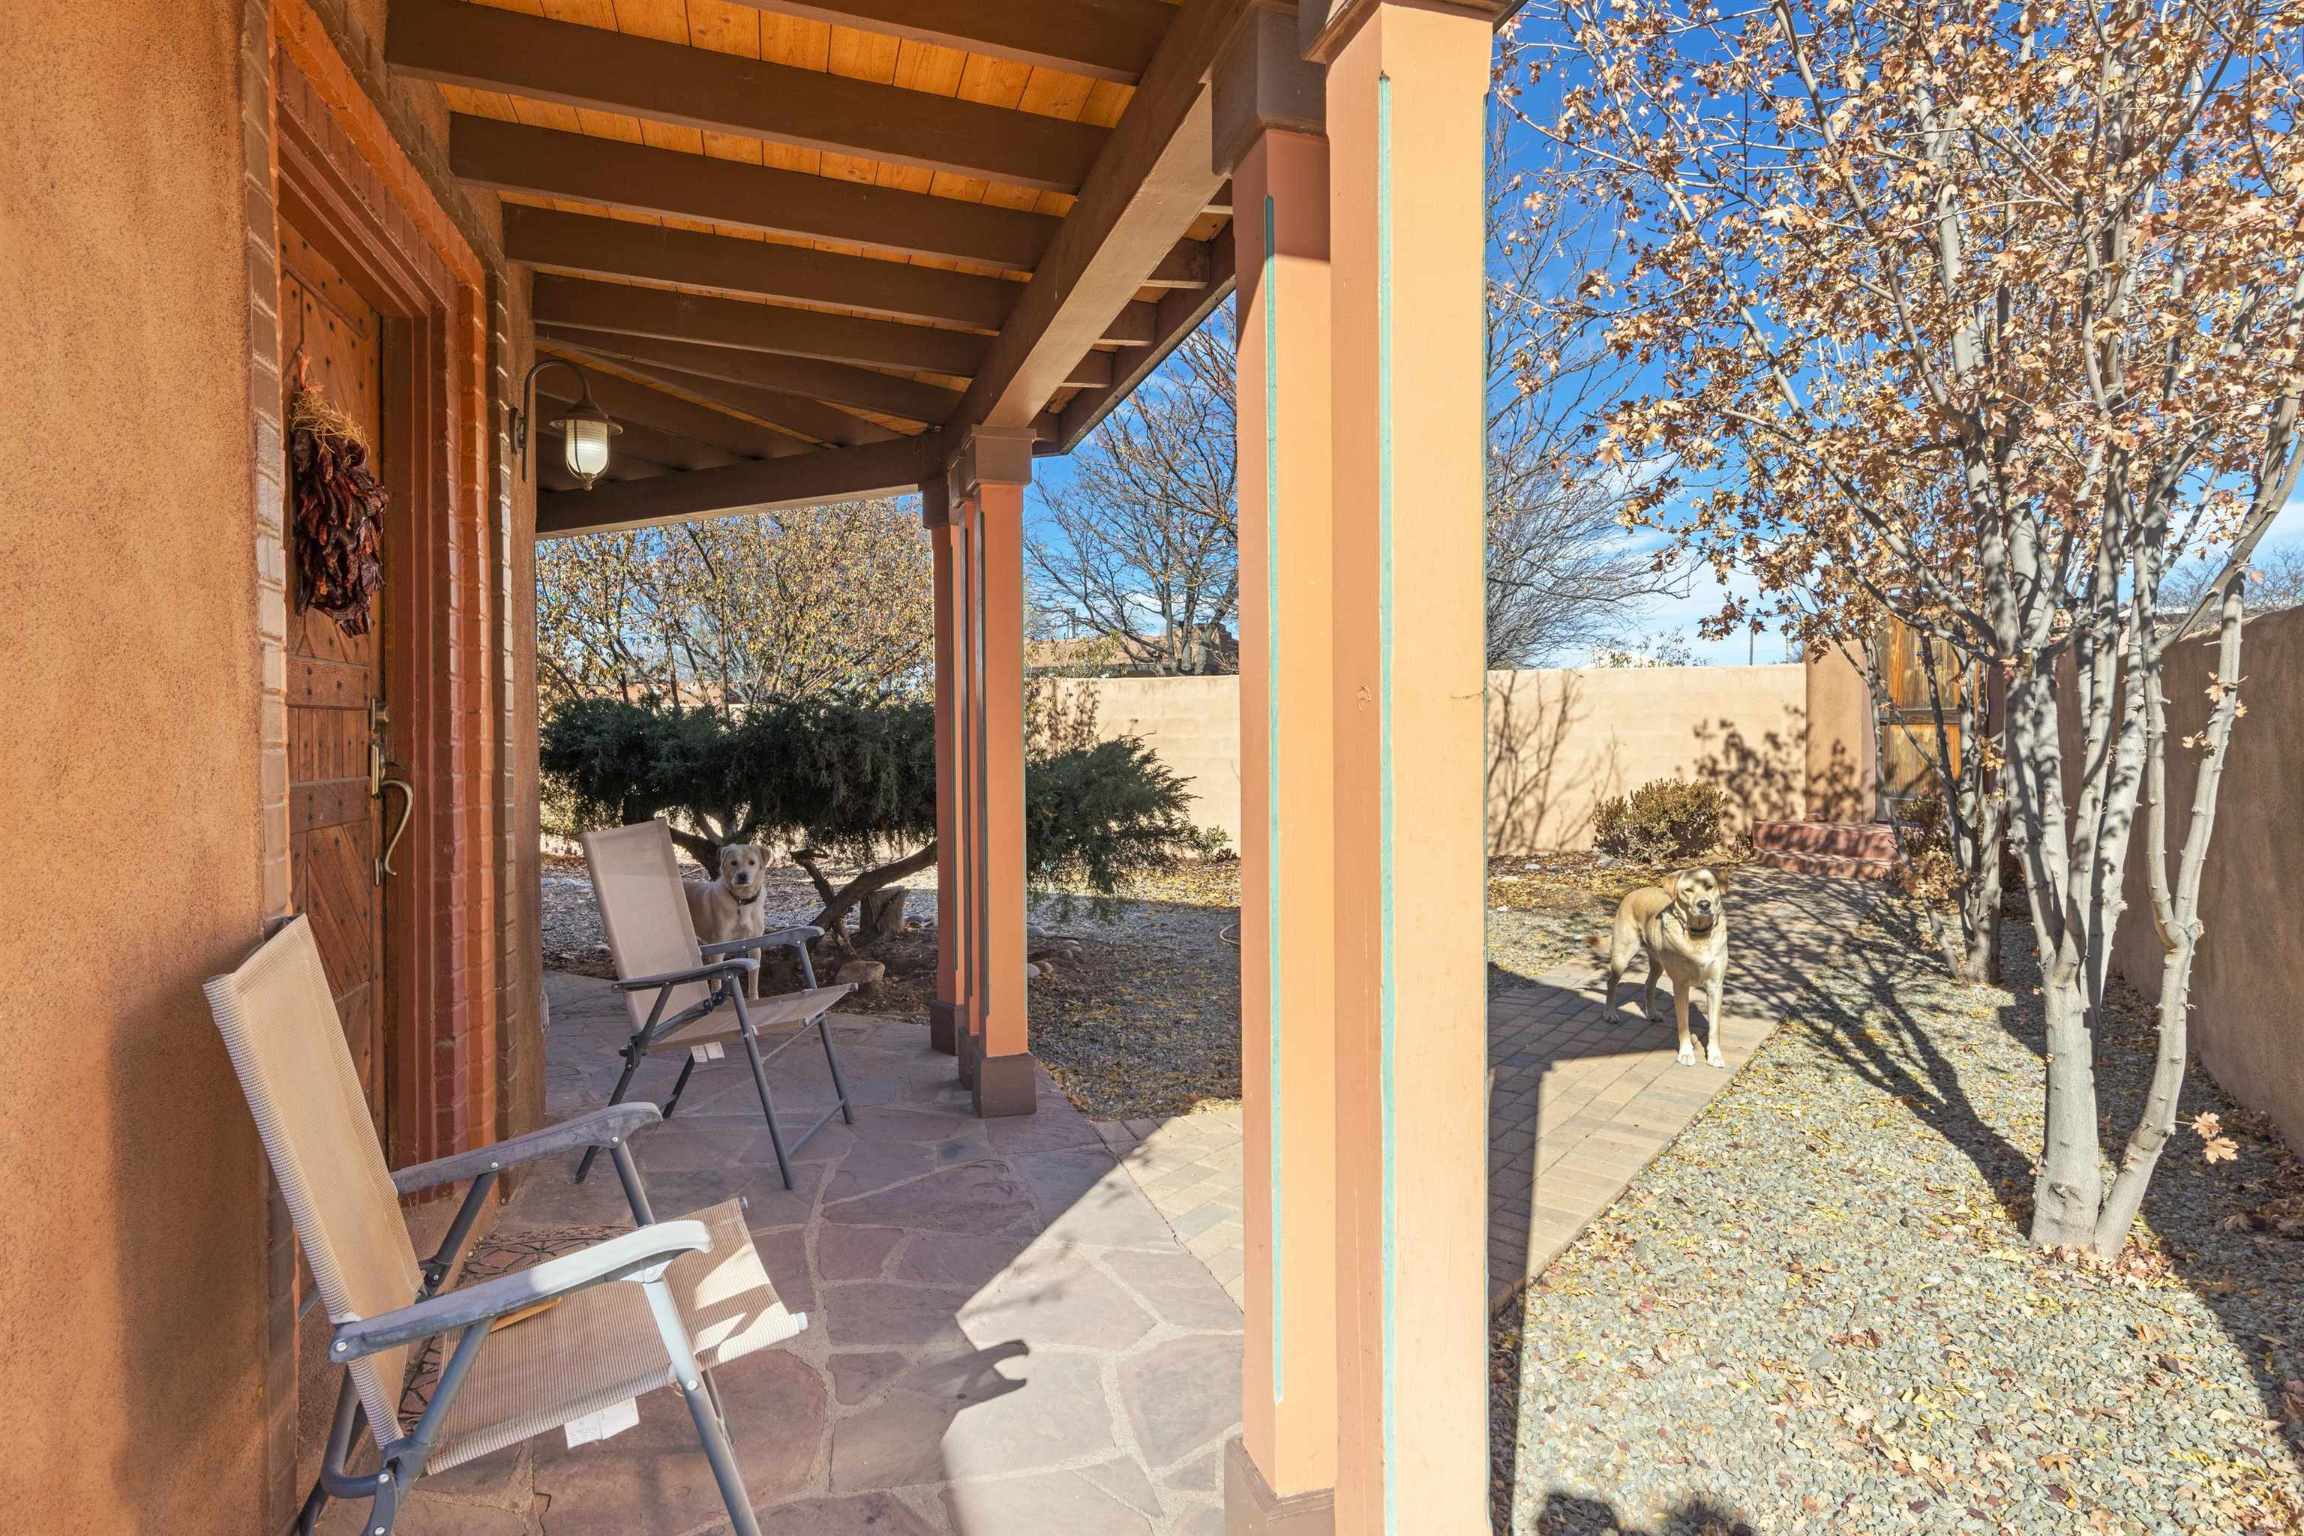 1324 Hickox, Santa Fe, New Mexico 87505, 3 Bedrooms Bedrooms, ,2 BathroomsBathrooms,Residential,For Sale,1324 Hickox,202105139